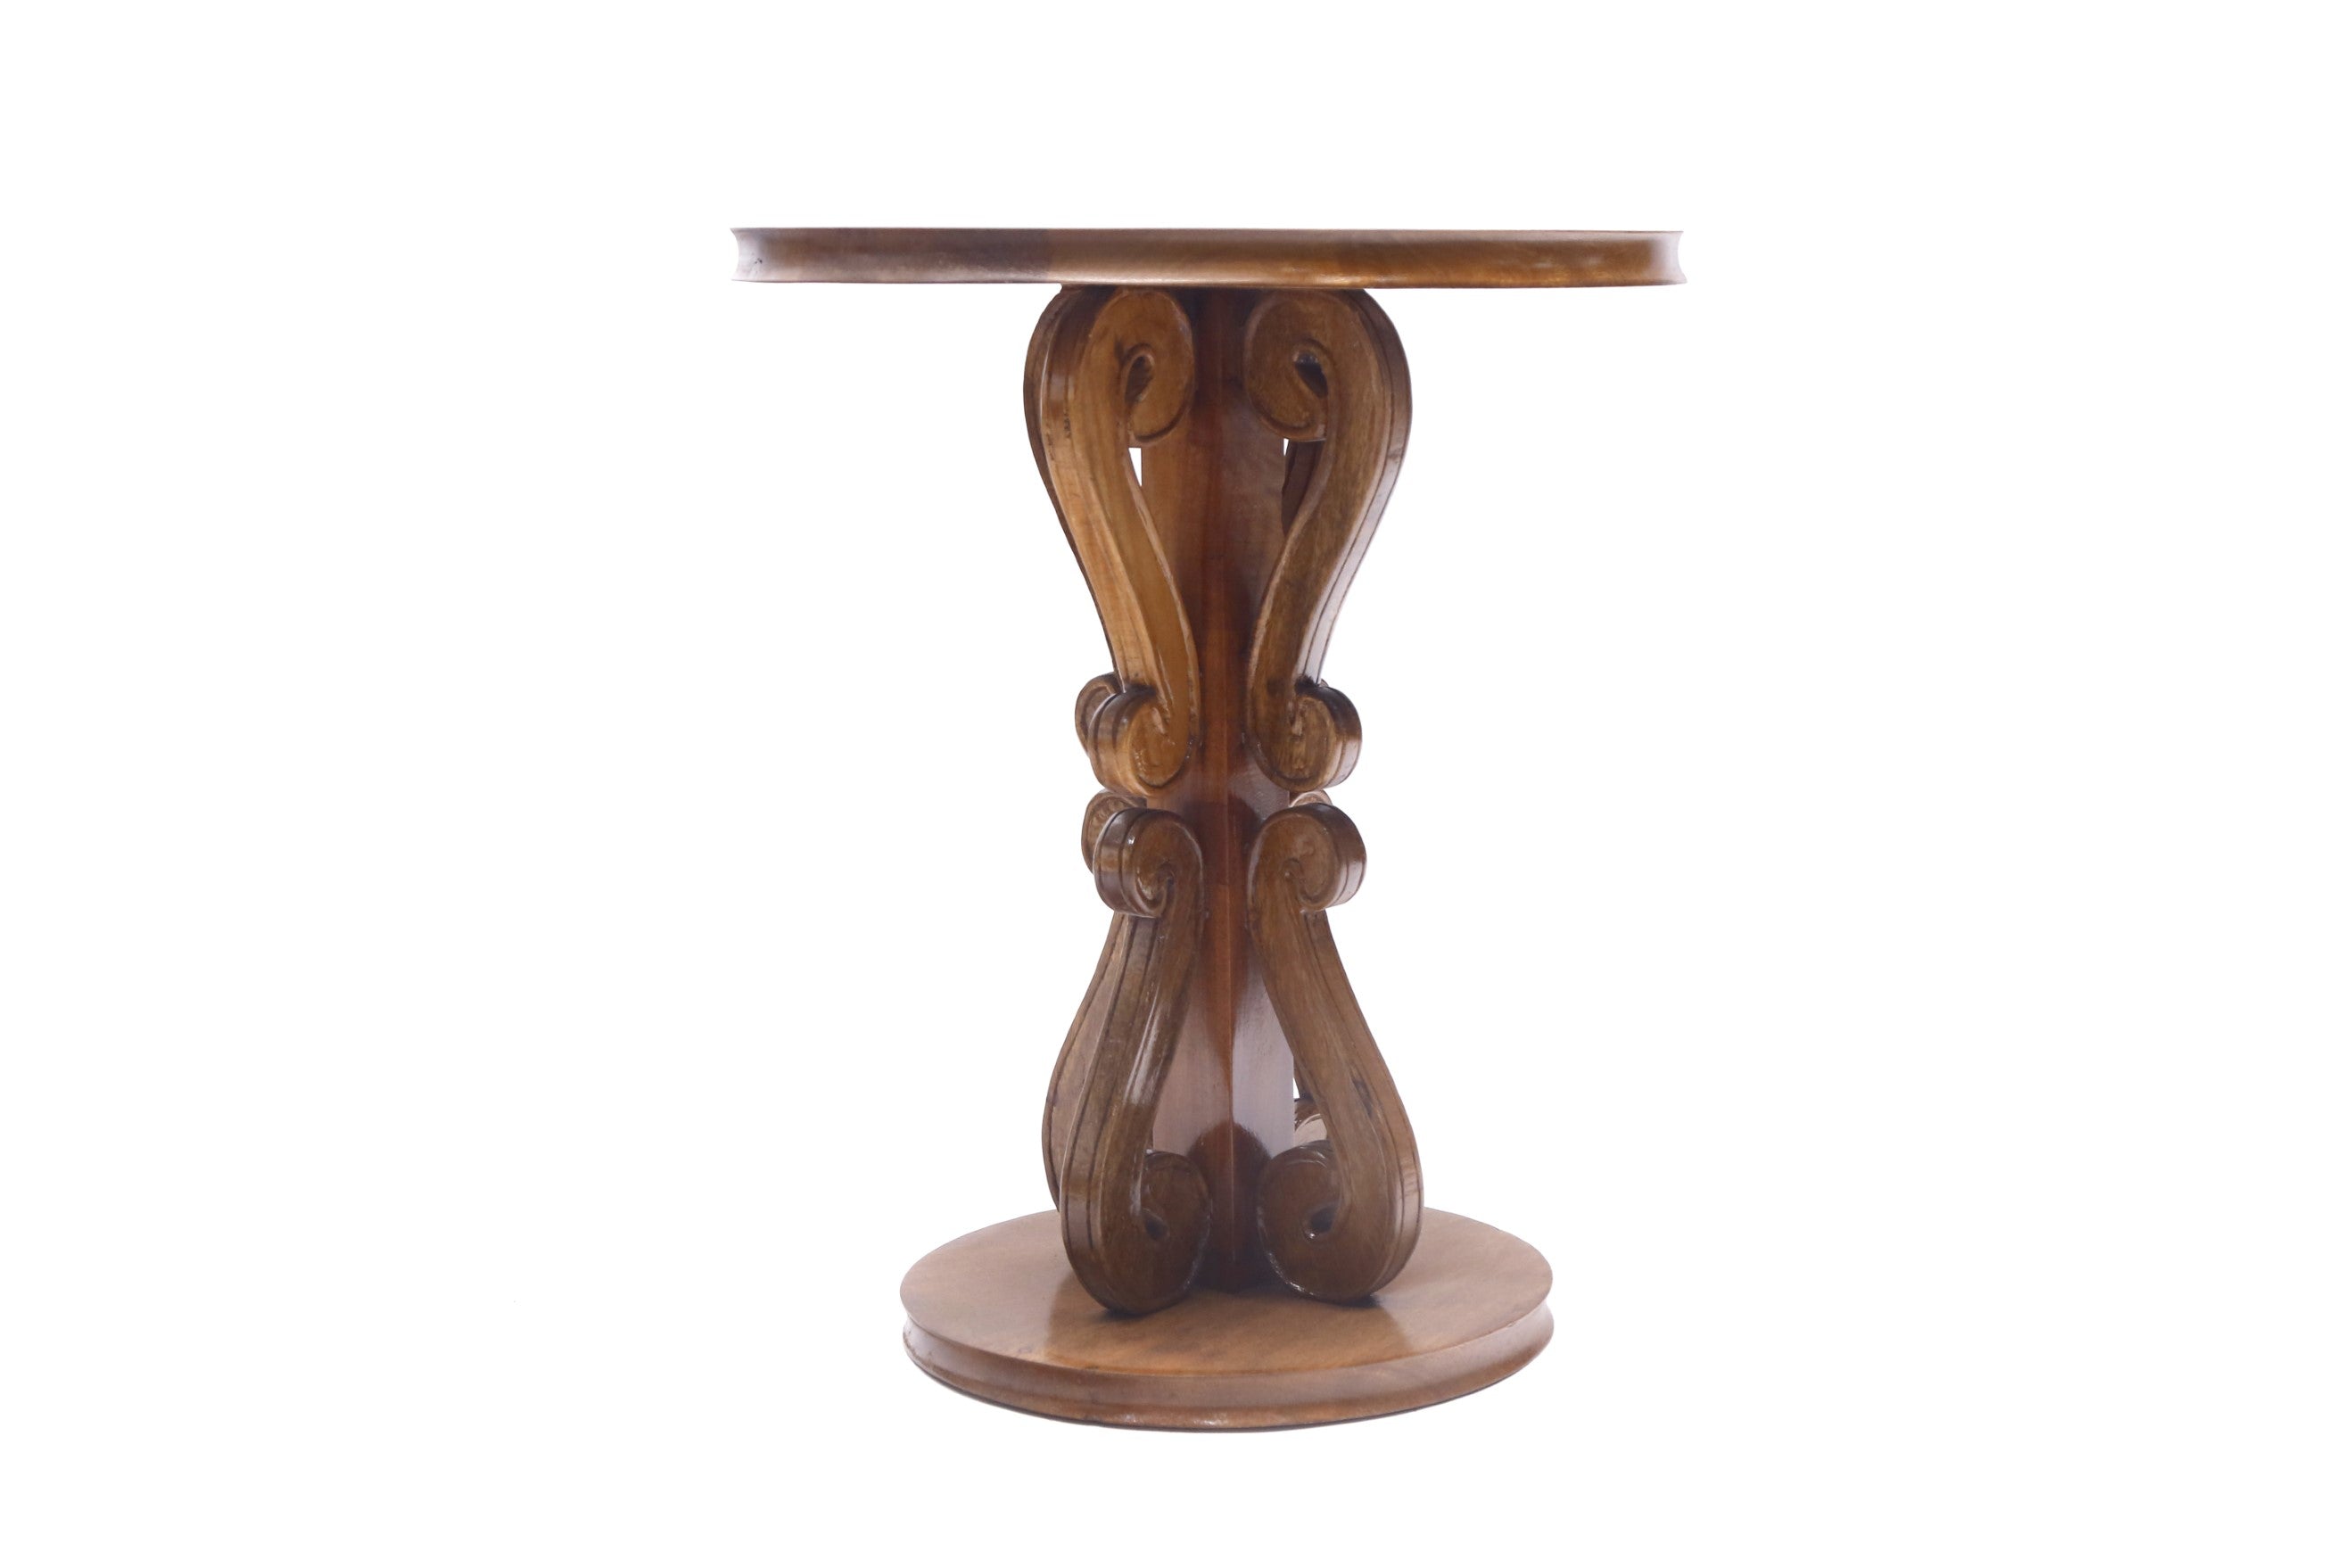 Wooden Curved Round End Table End Table